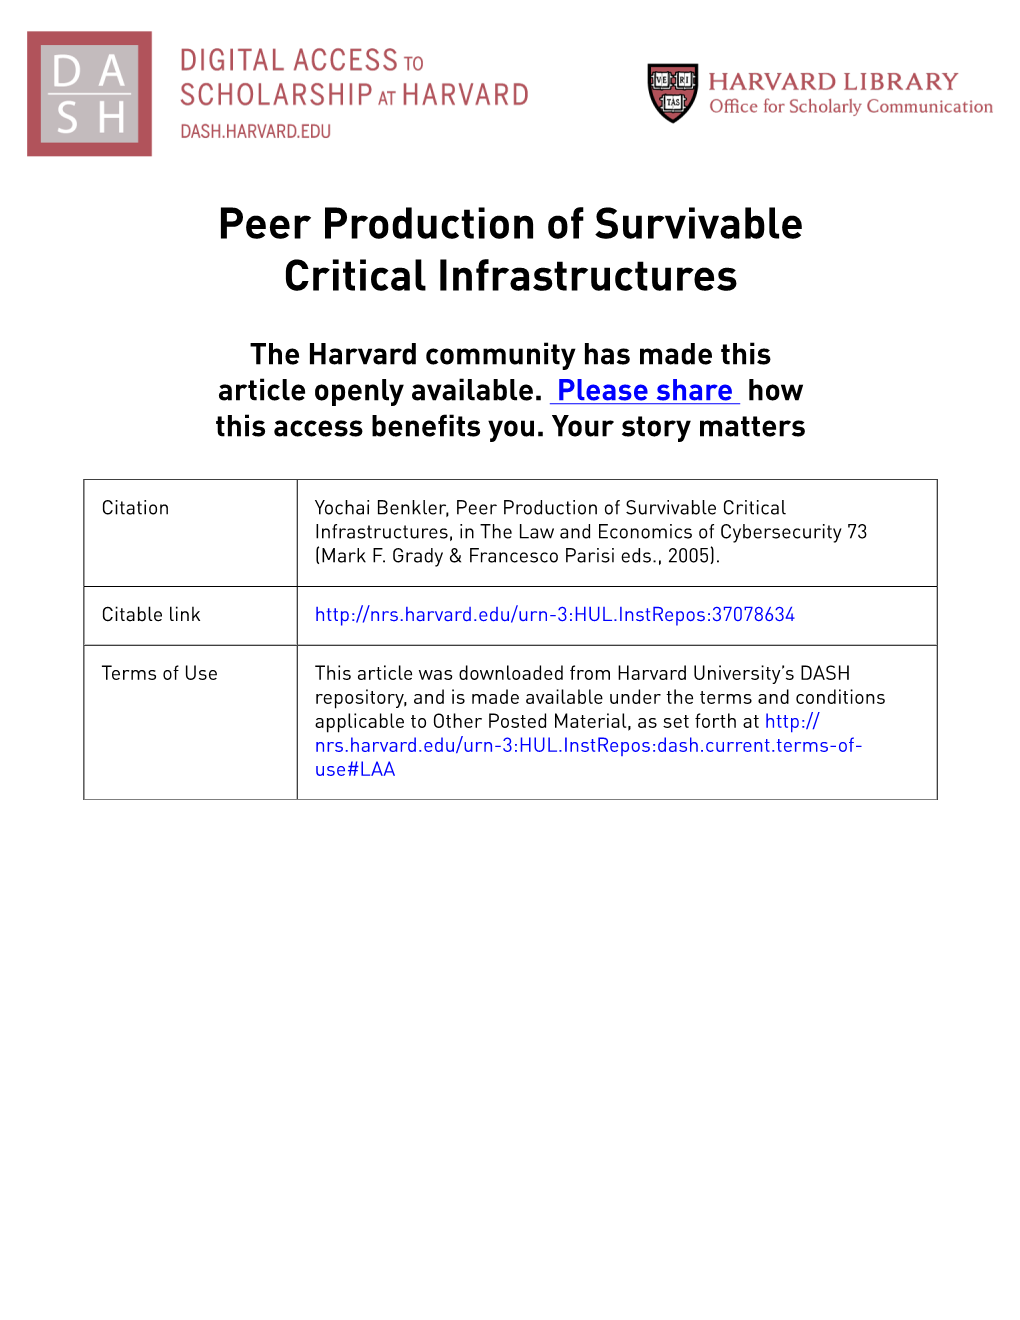 Peer Production of Survivable Infrastructures